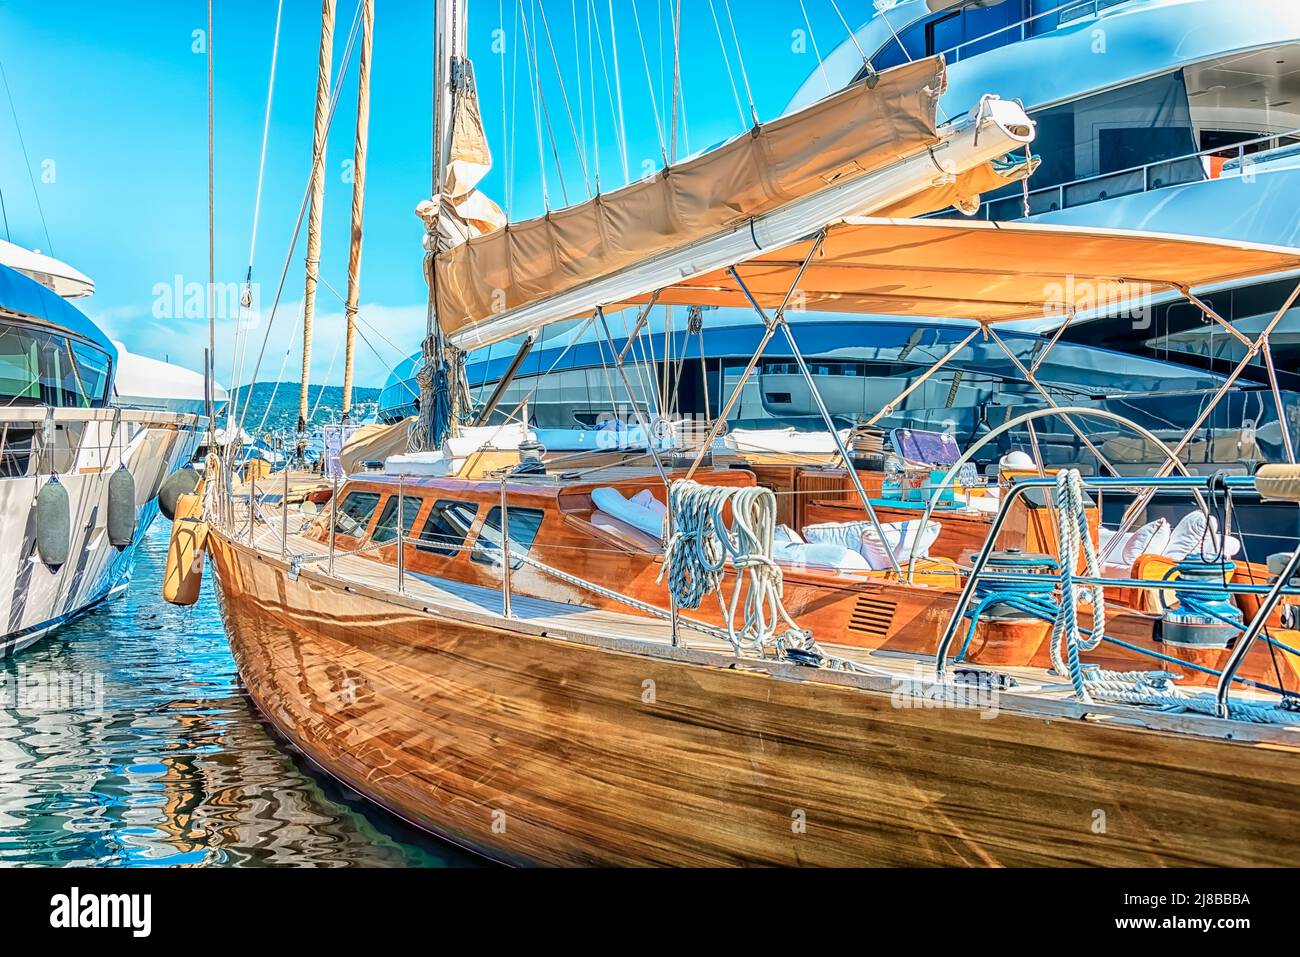 Sailboat in the port of St Tropez Stock Photo